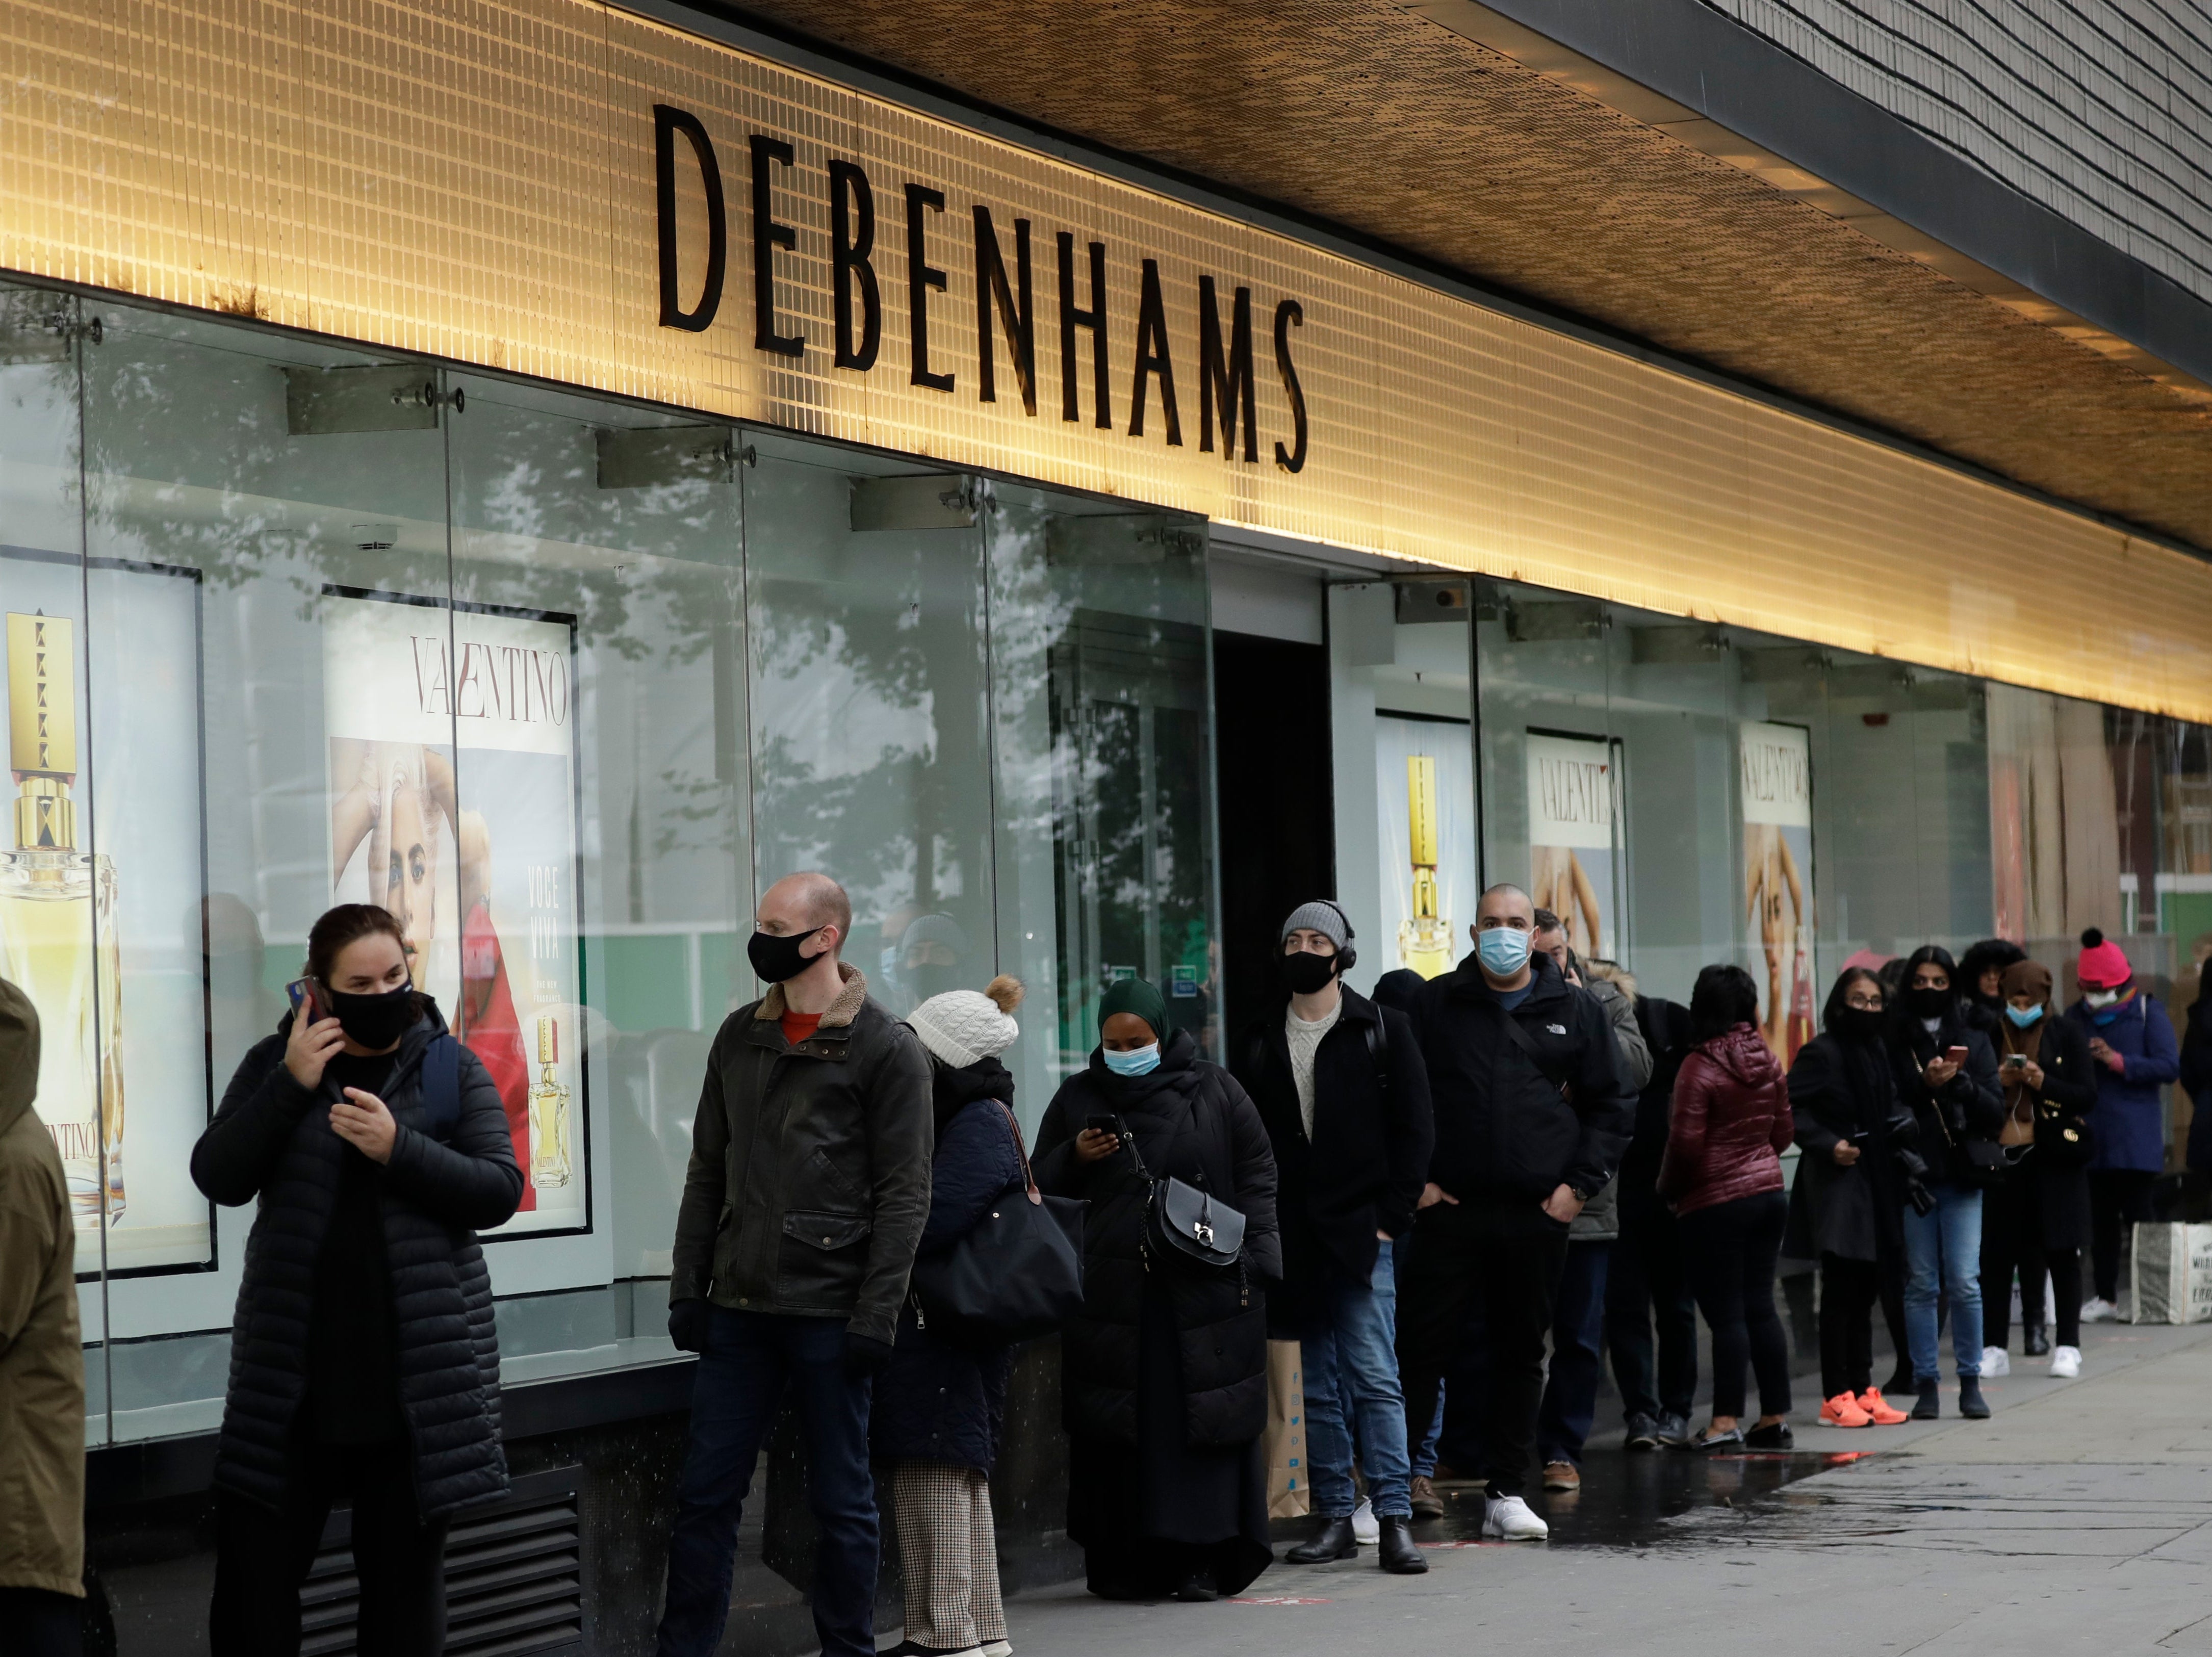 People queue up waiting for the Debenhams department store, which is expected to close down, in London’s Oxford Street